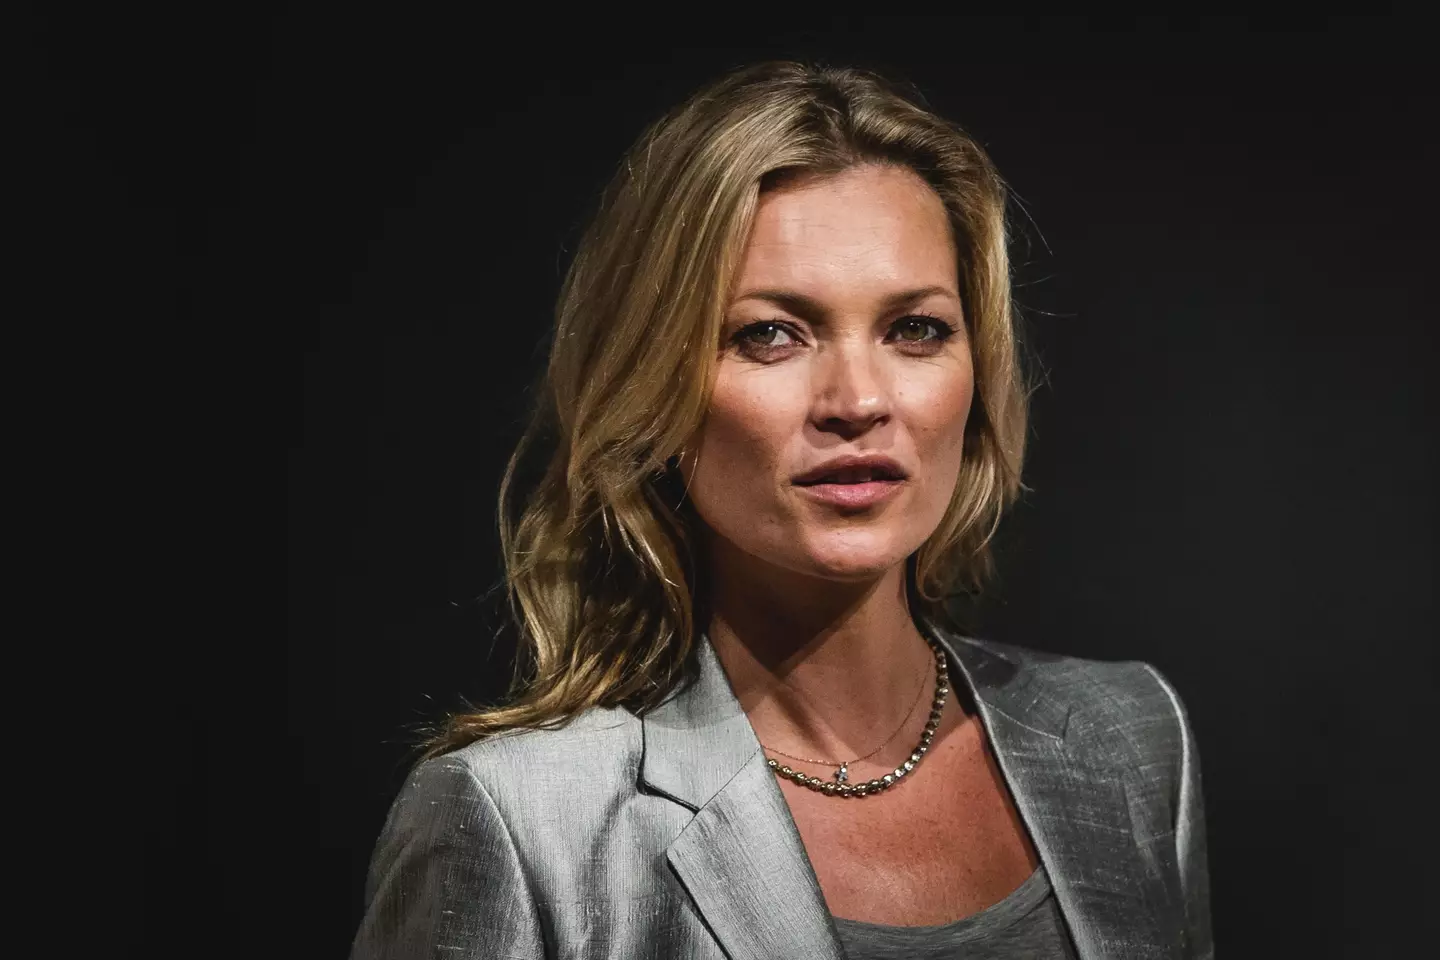 Johnny did not intend for his ex-girlfriend Kate Moss to testify during the case.